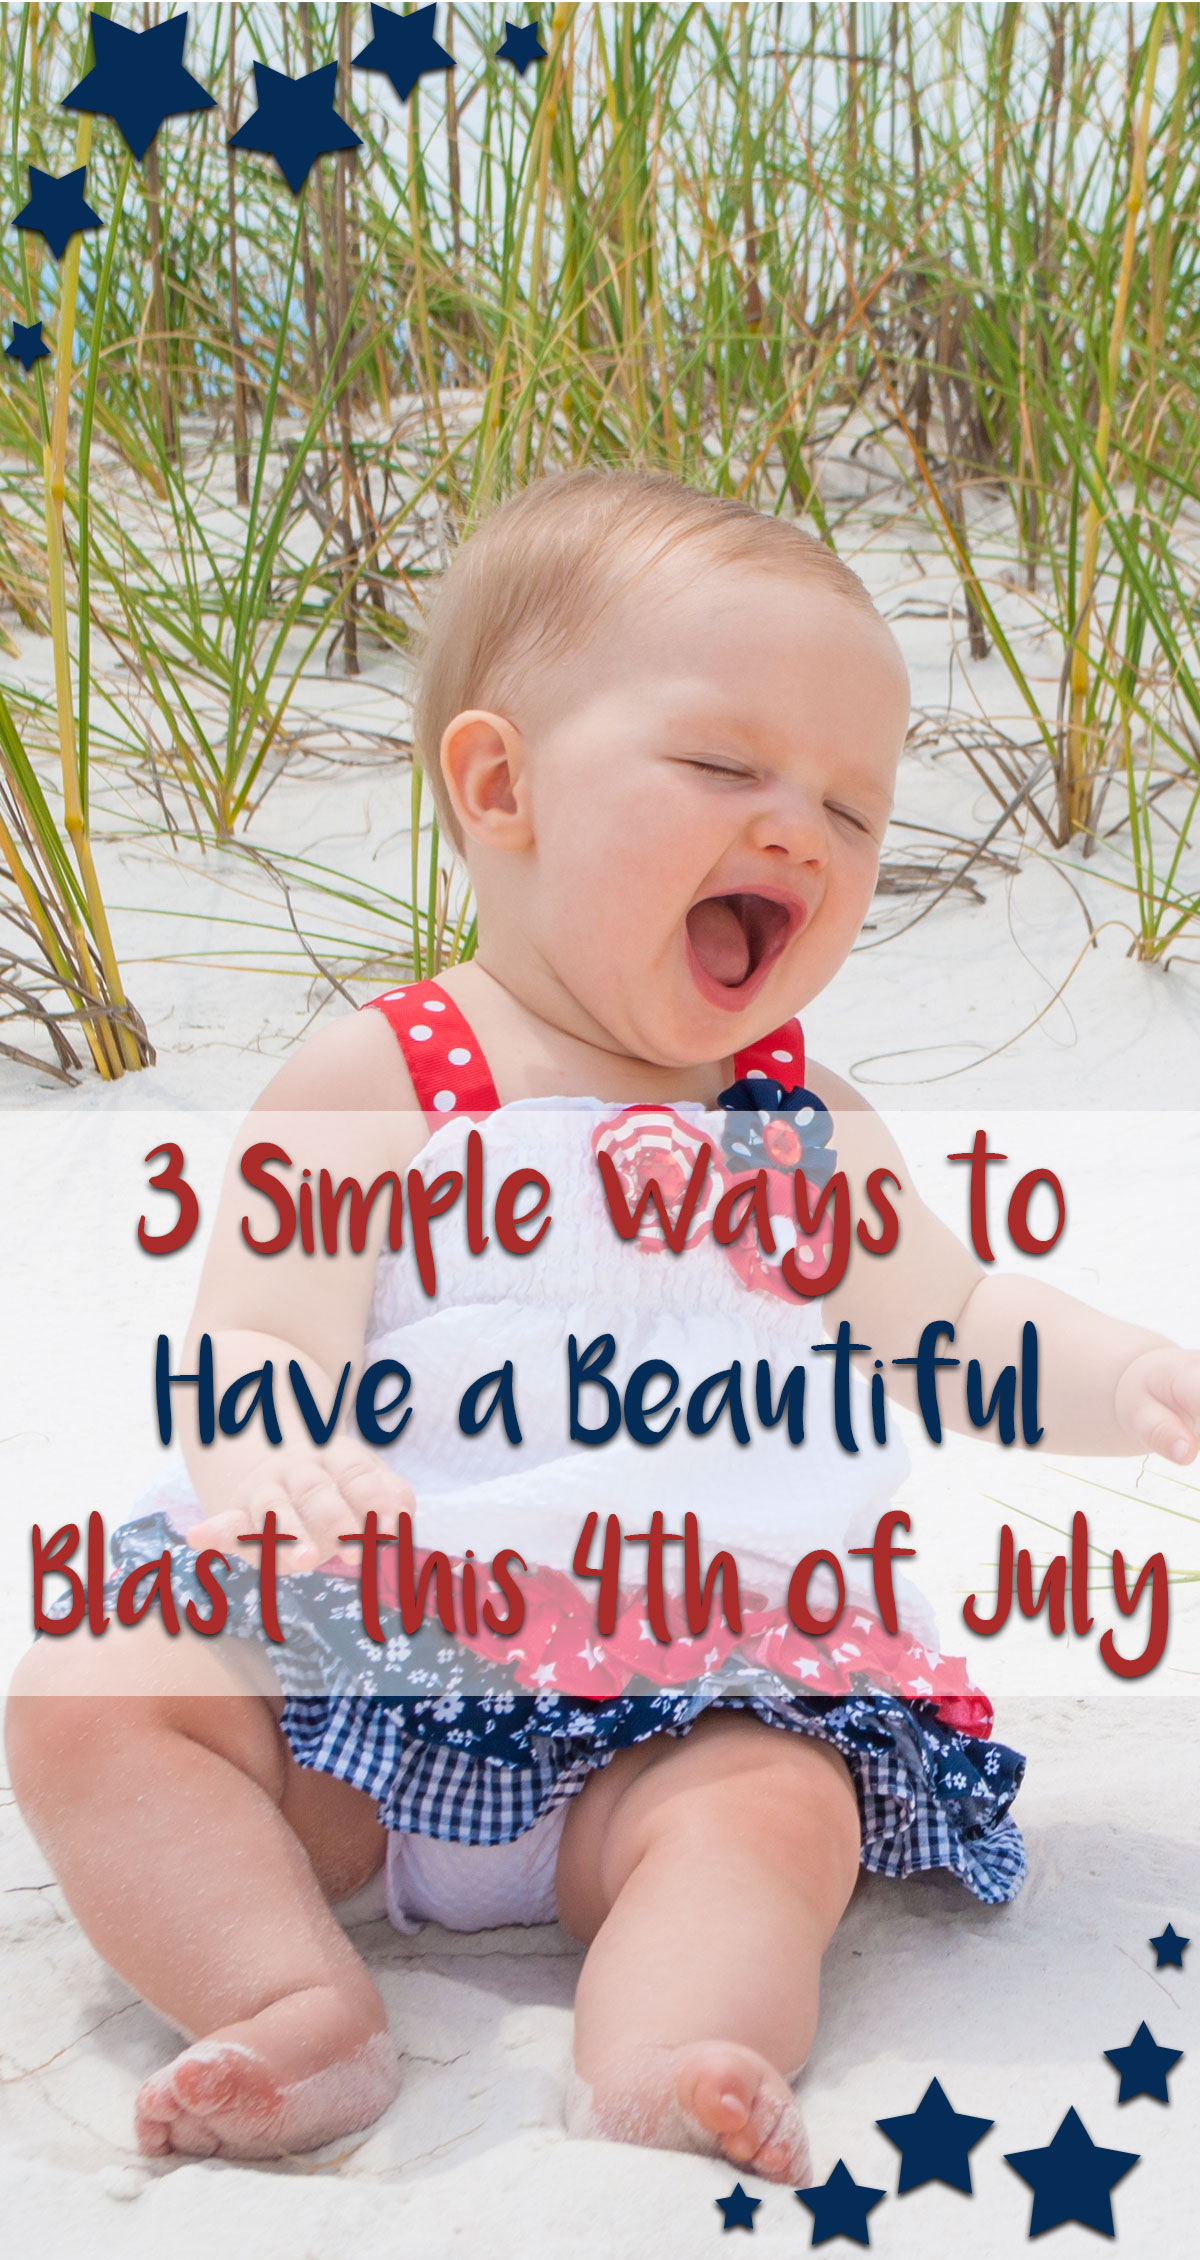 3 Simple Ways to Have a Beautiful Blast this 4th of July Pin